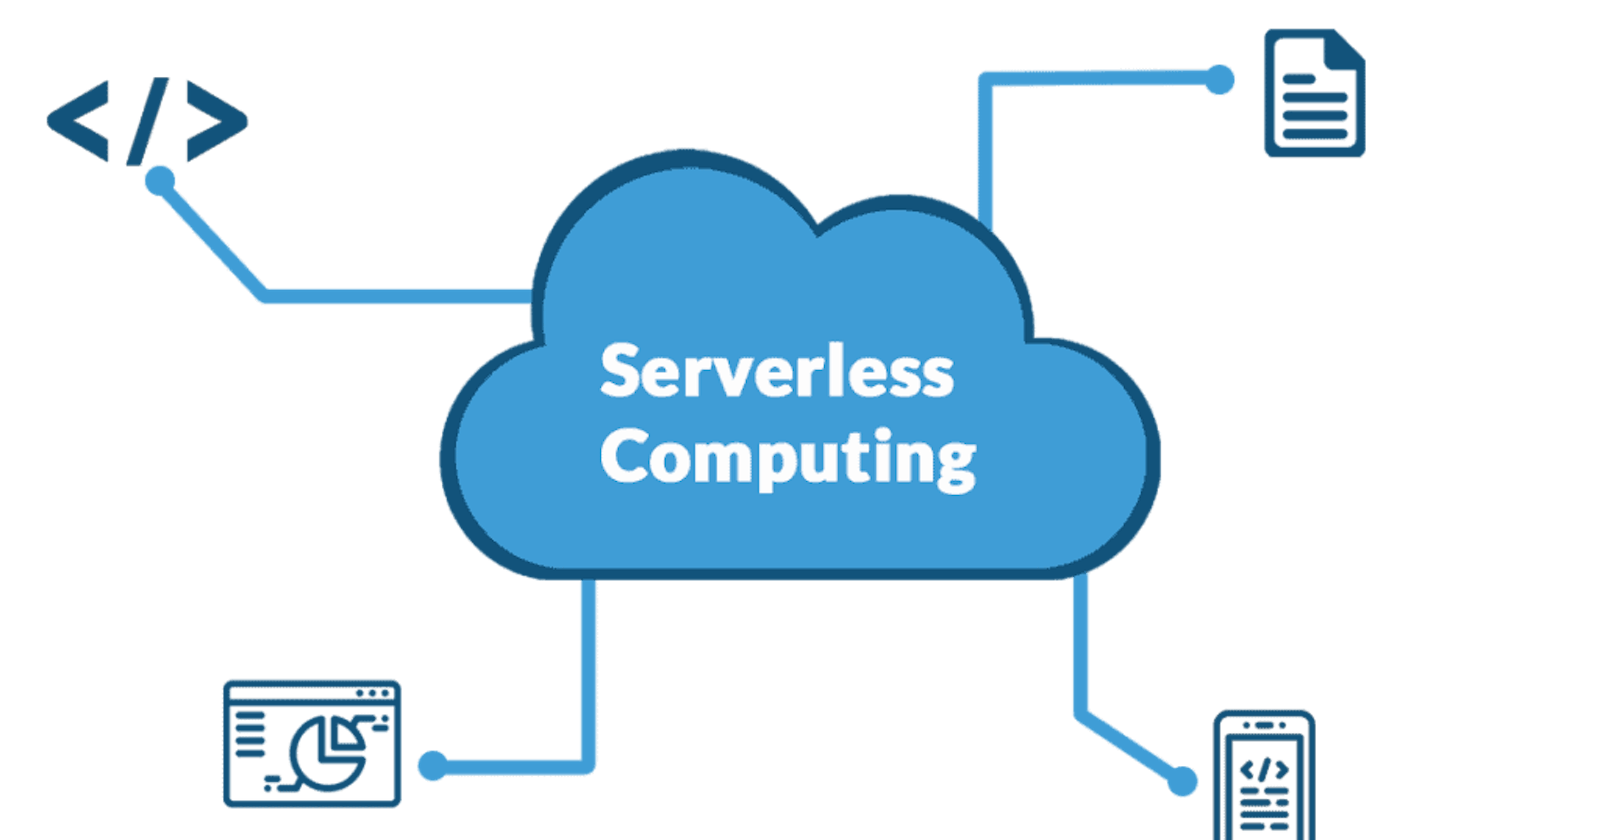 How does serverless computing work, and what are its advantages?